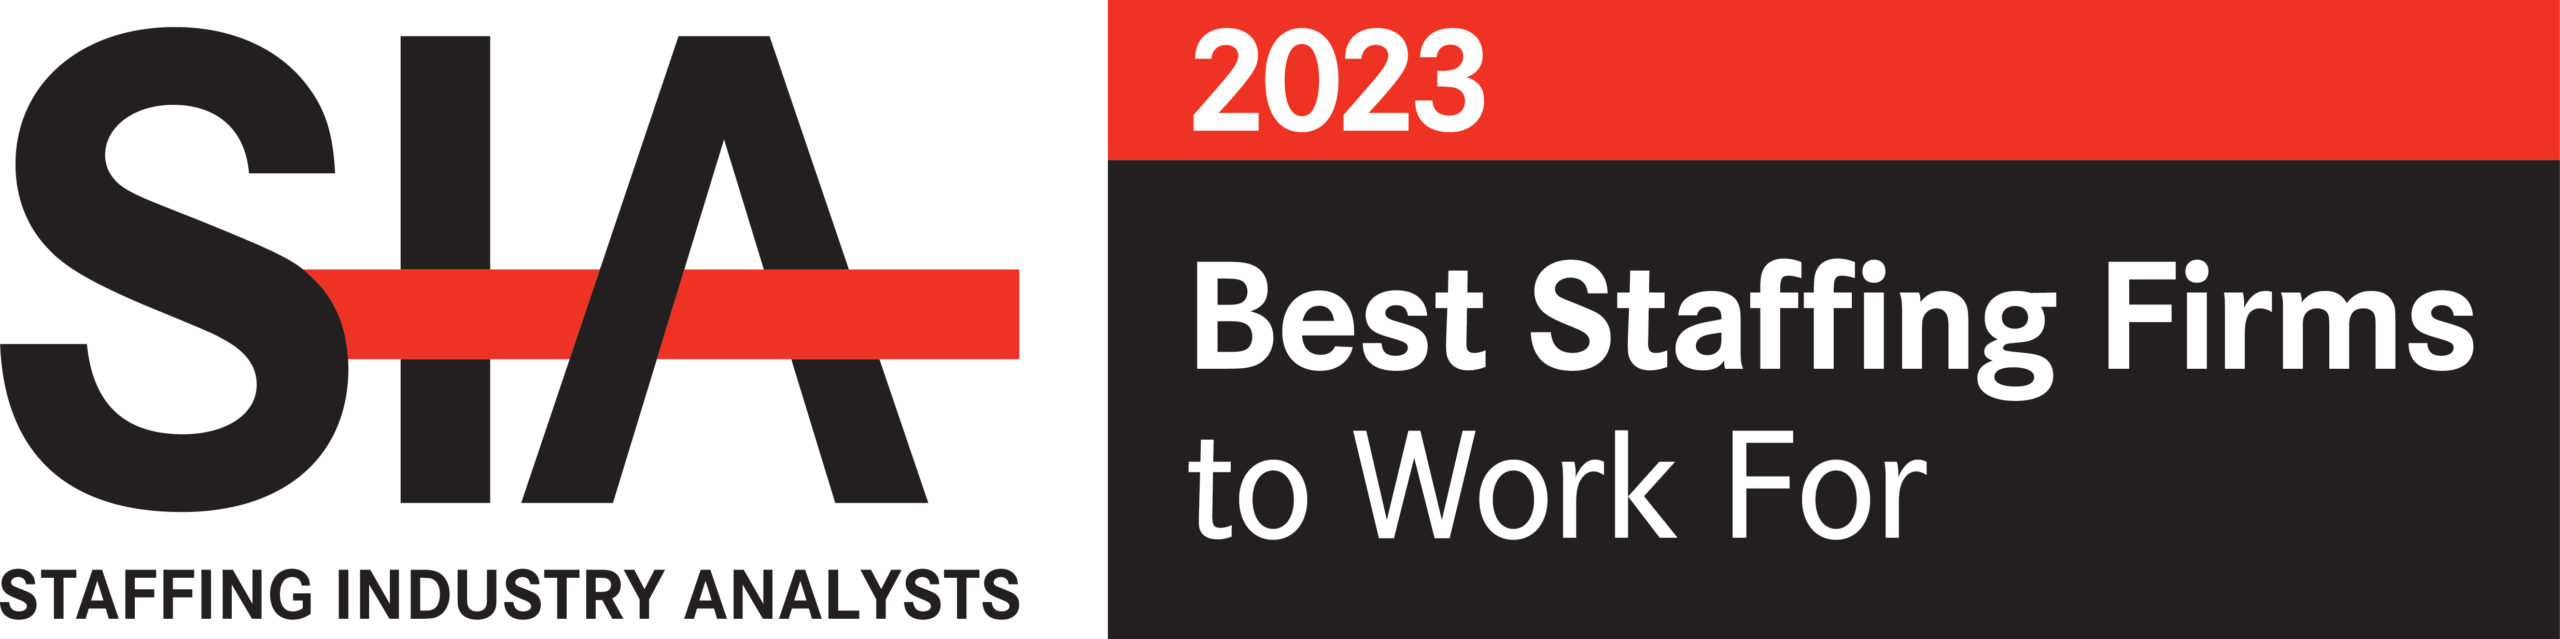 All Star Healthcare Solutions Named a 2023 “Best Staffing Firm to Work For”